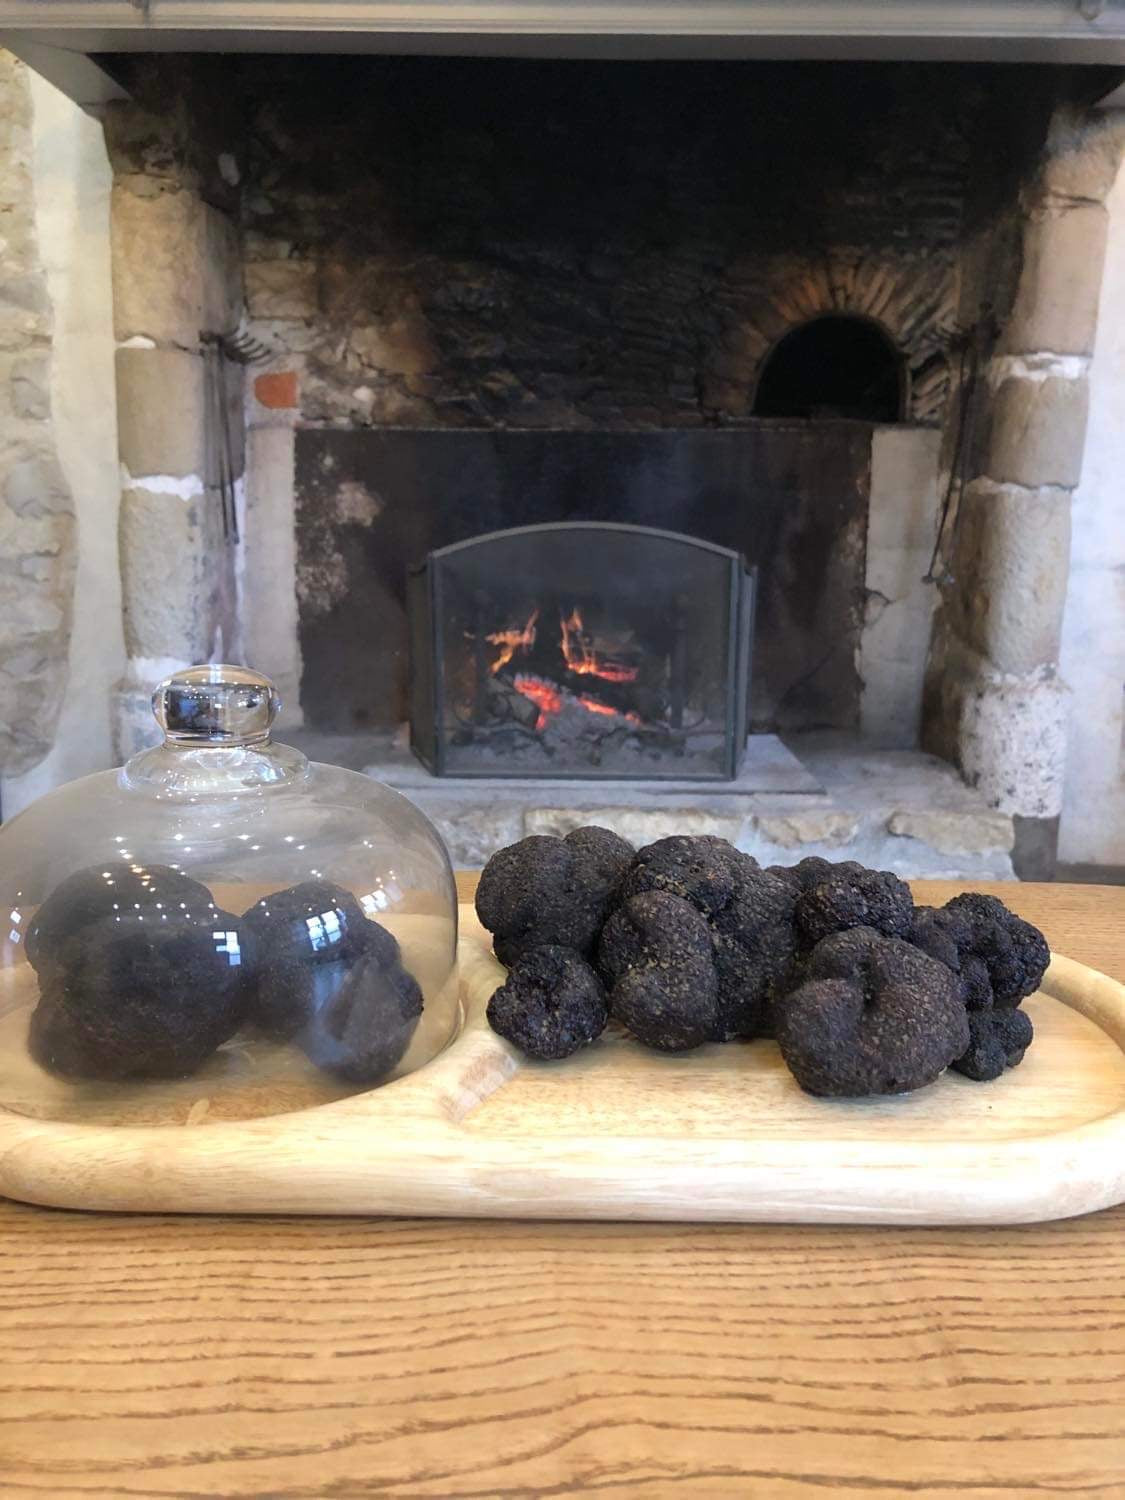 More Truffles from your tree's